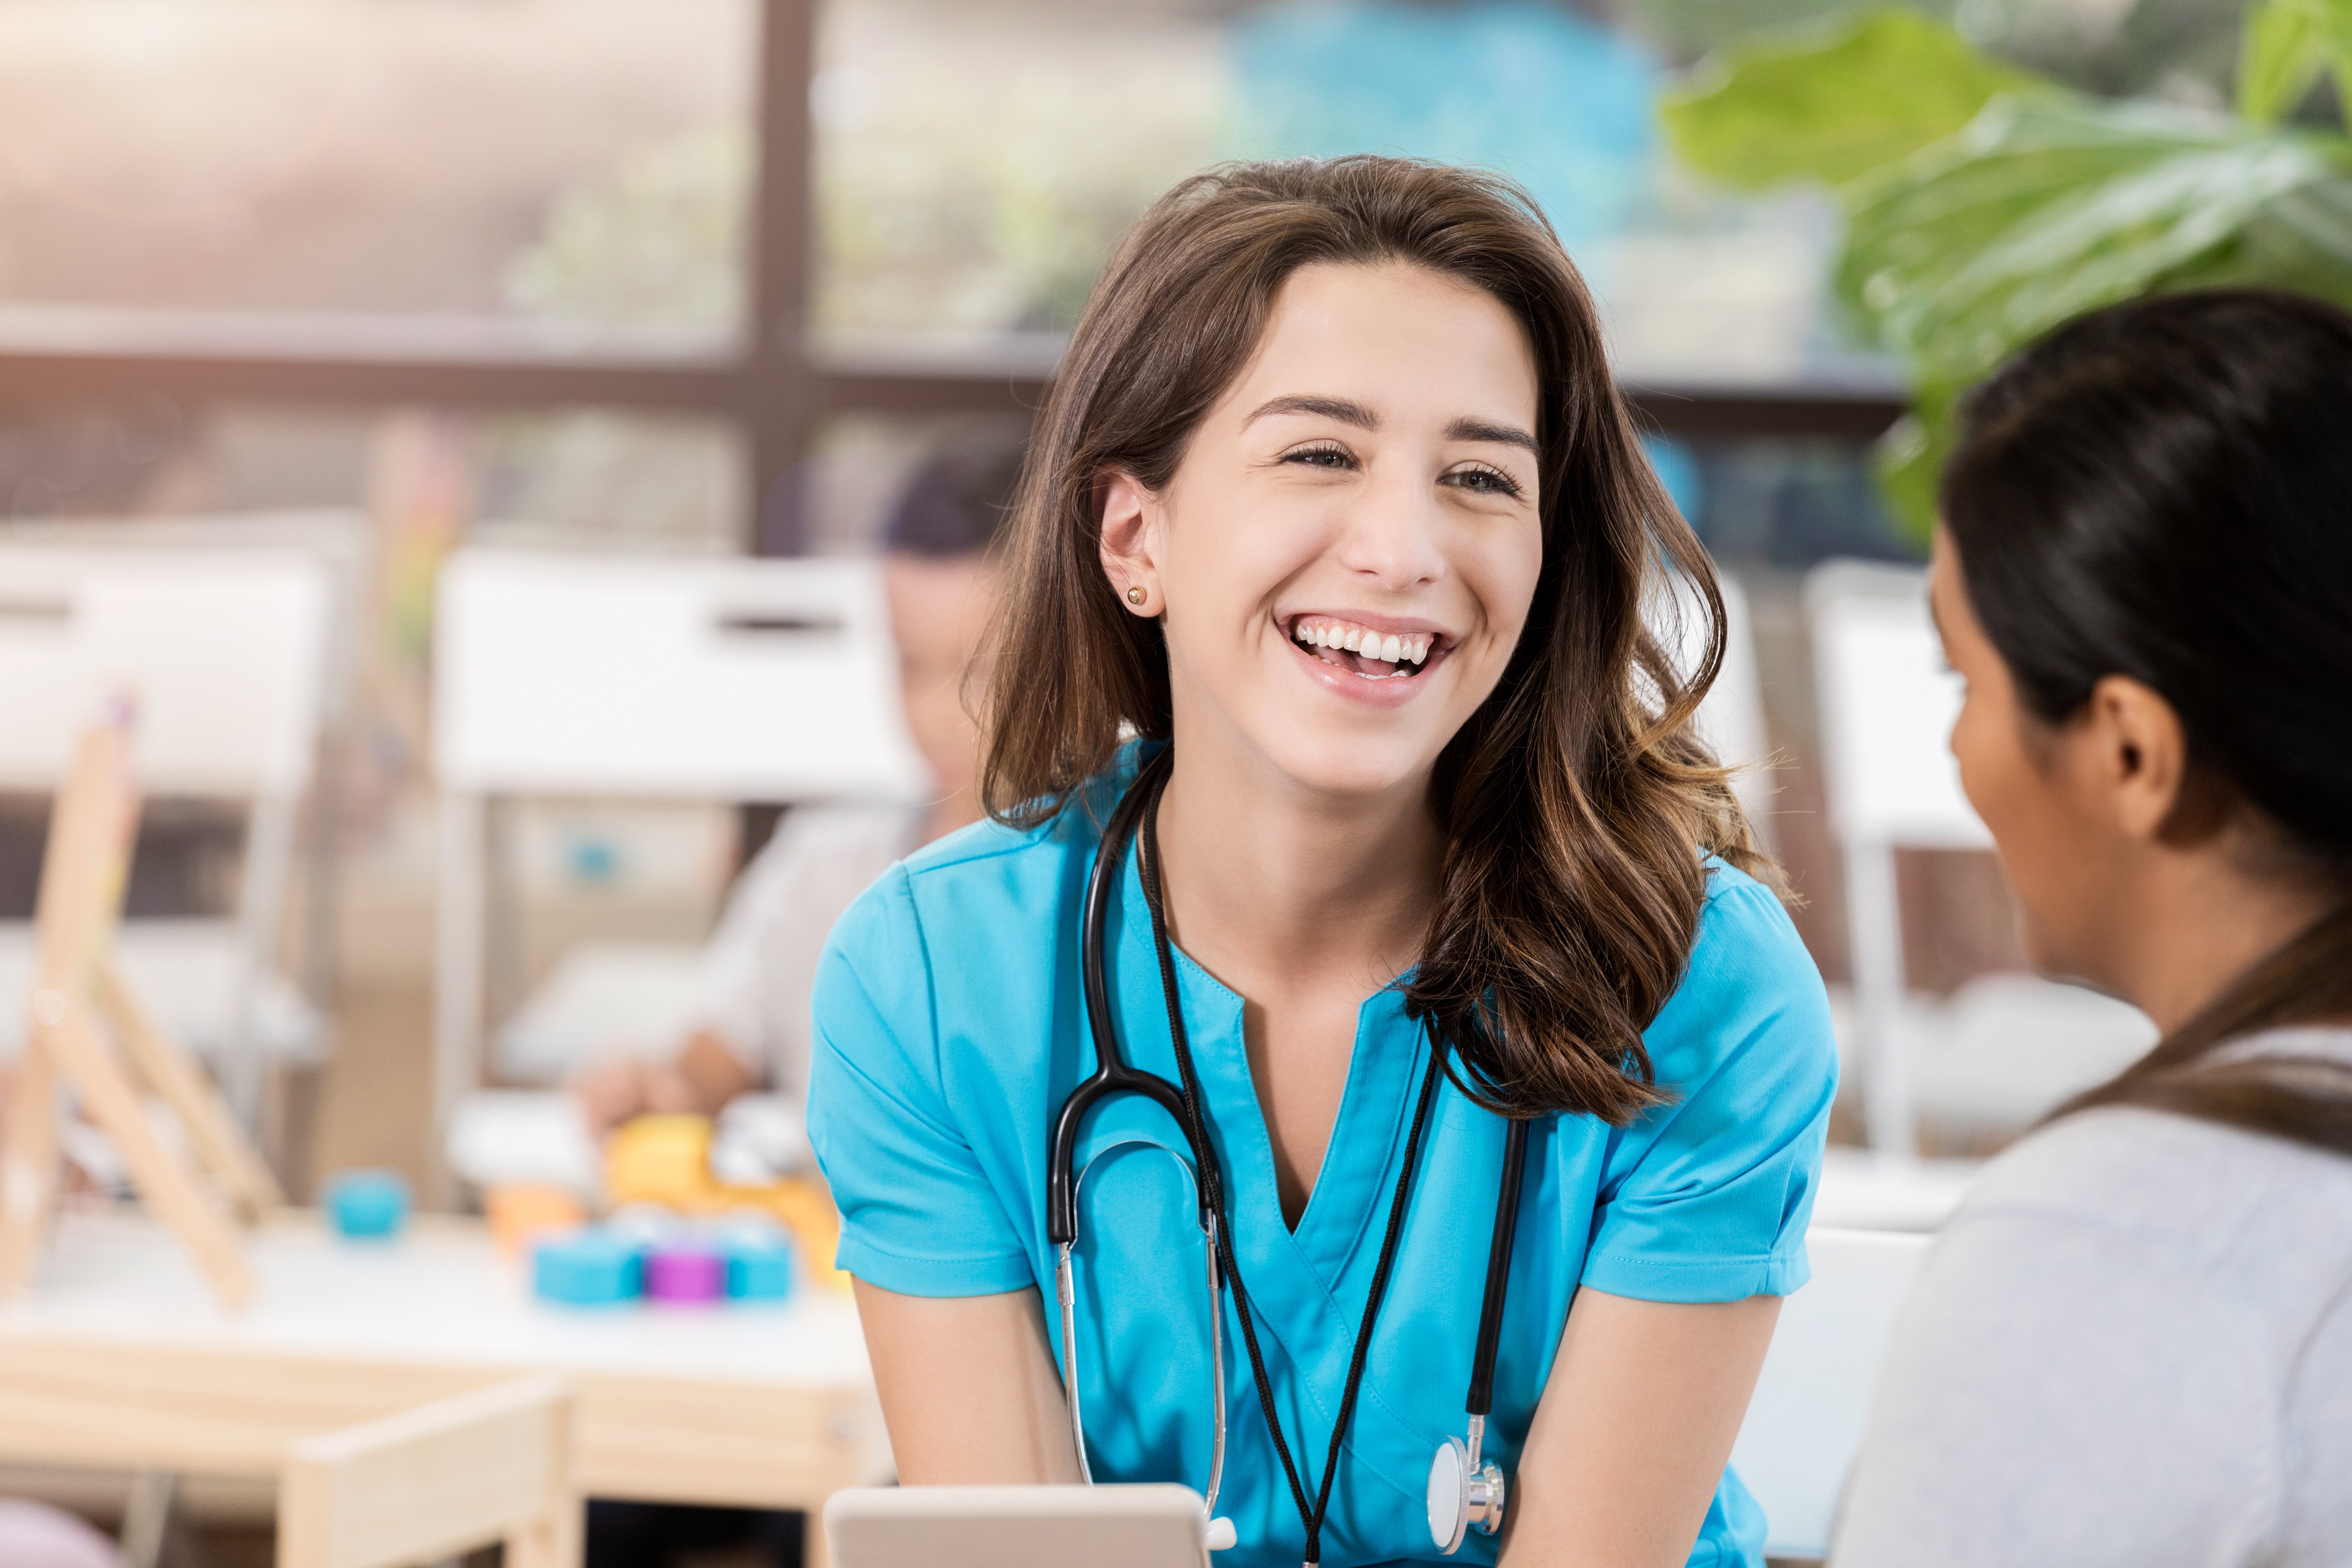 female medical professional smiling at another person